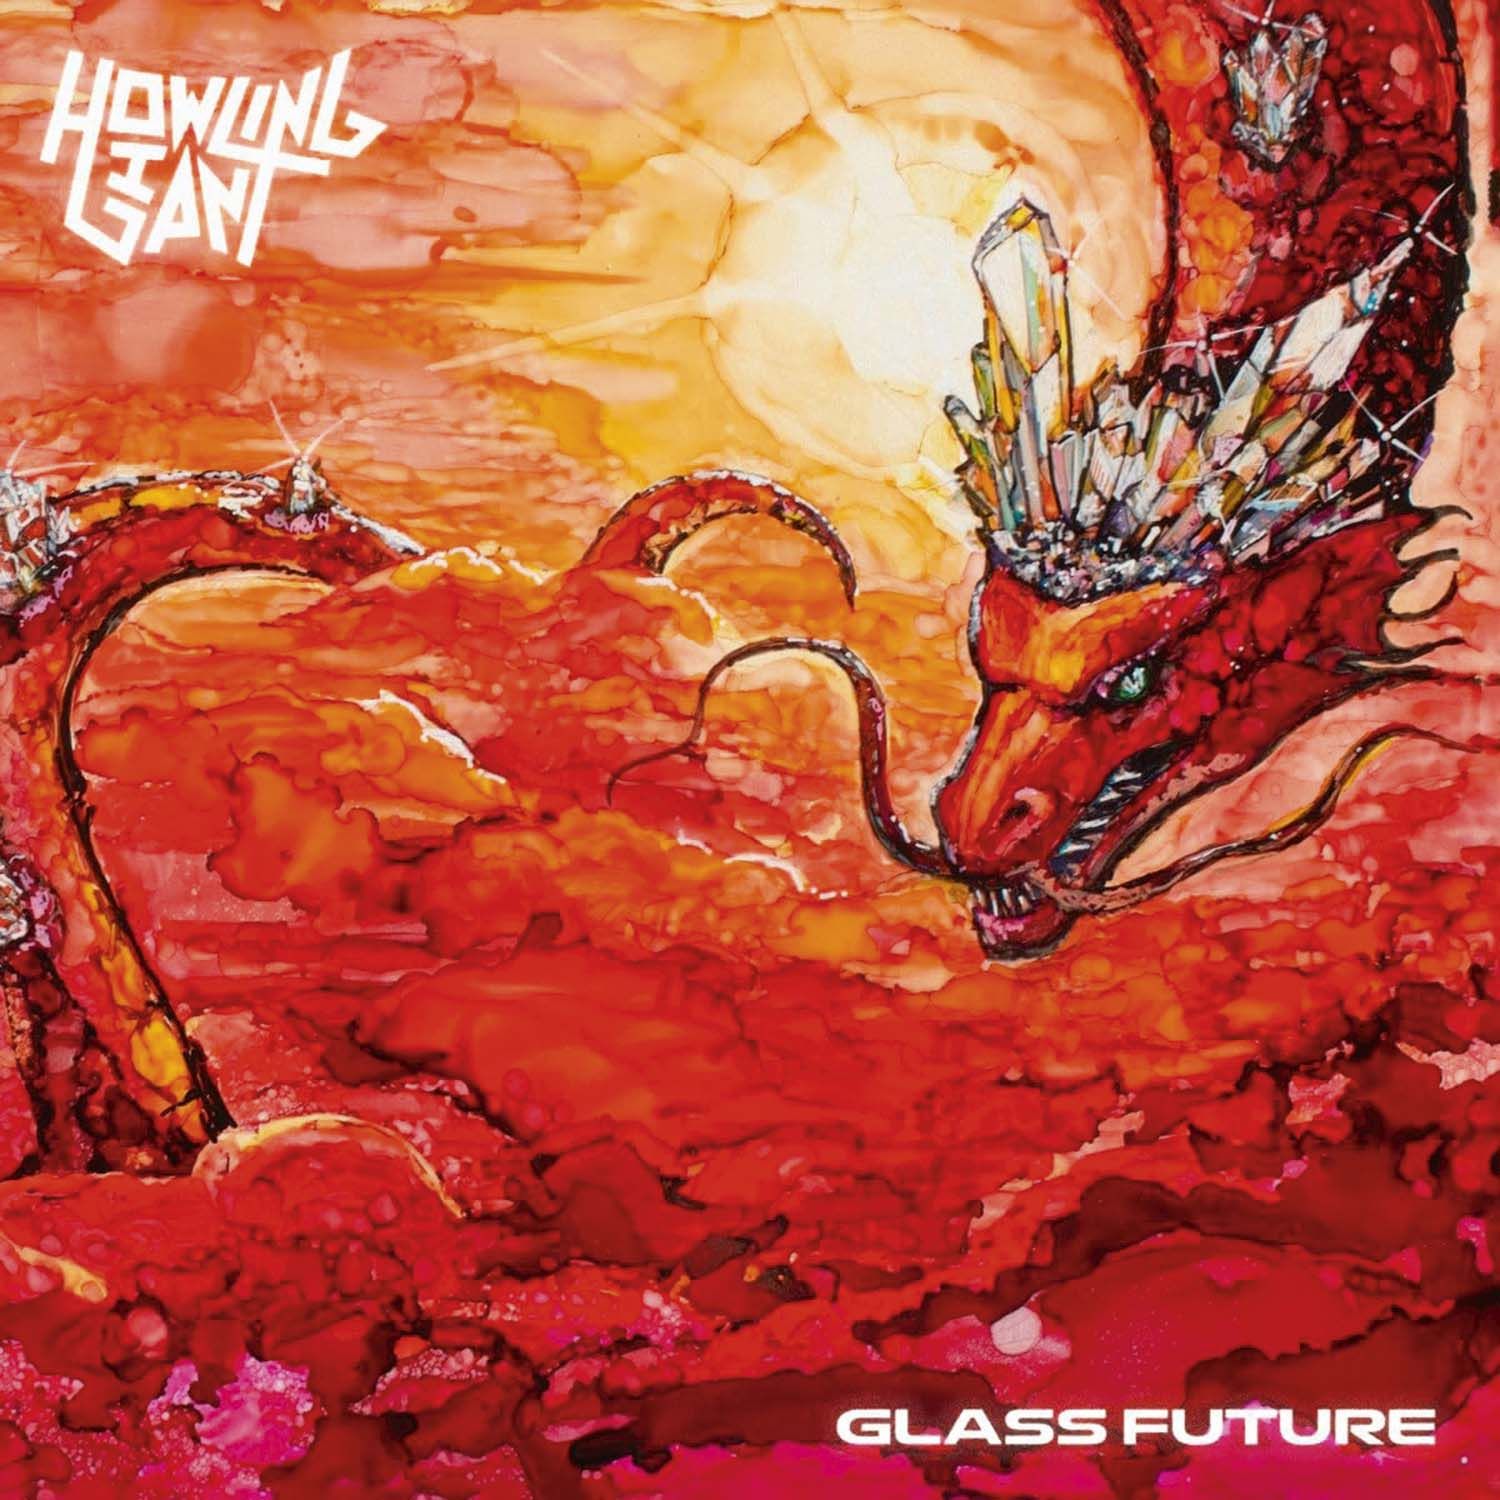 Howling Giant - Glass Future - Cover